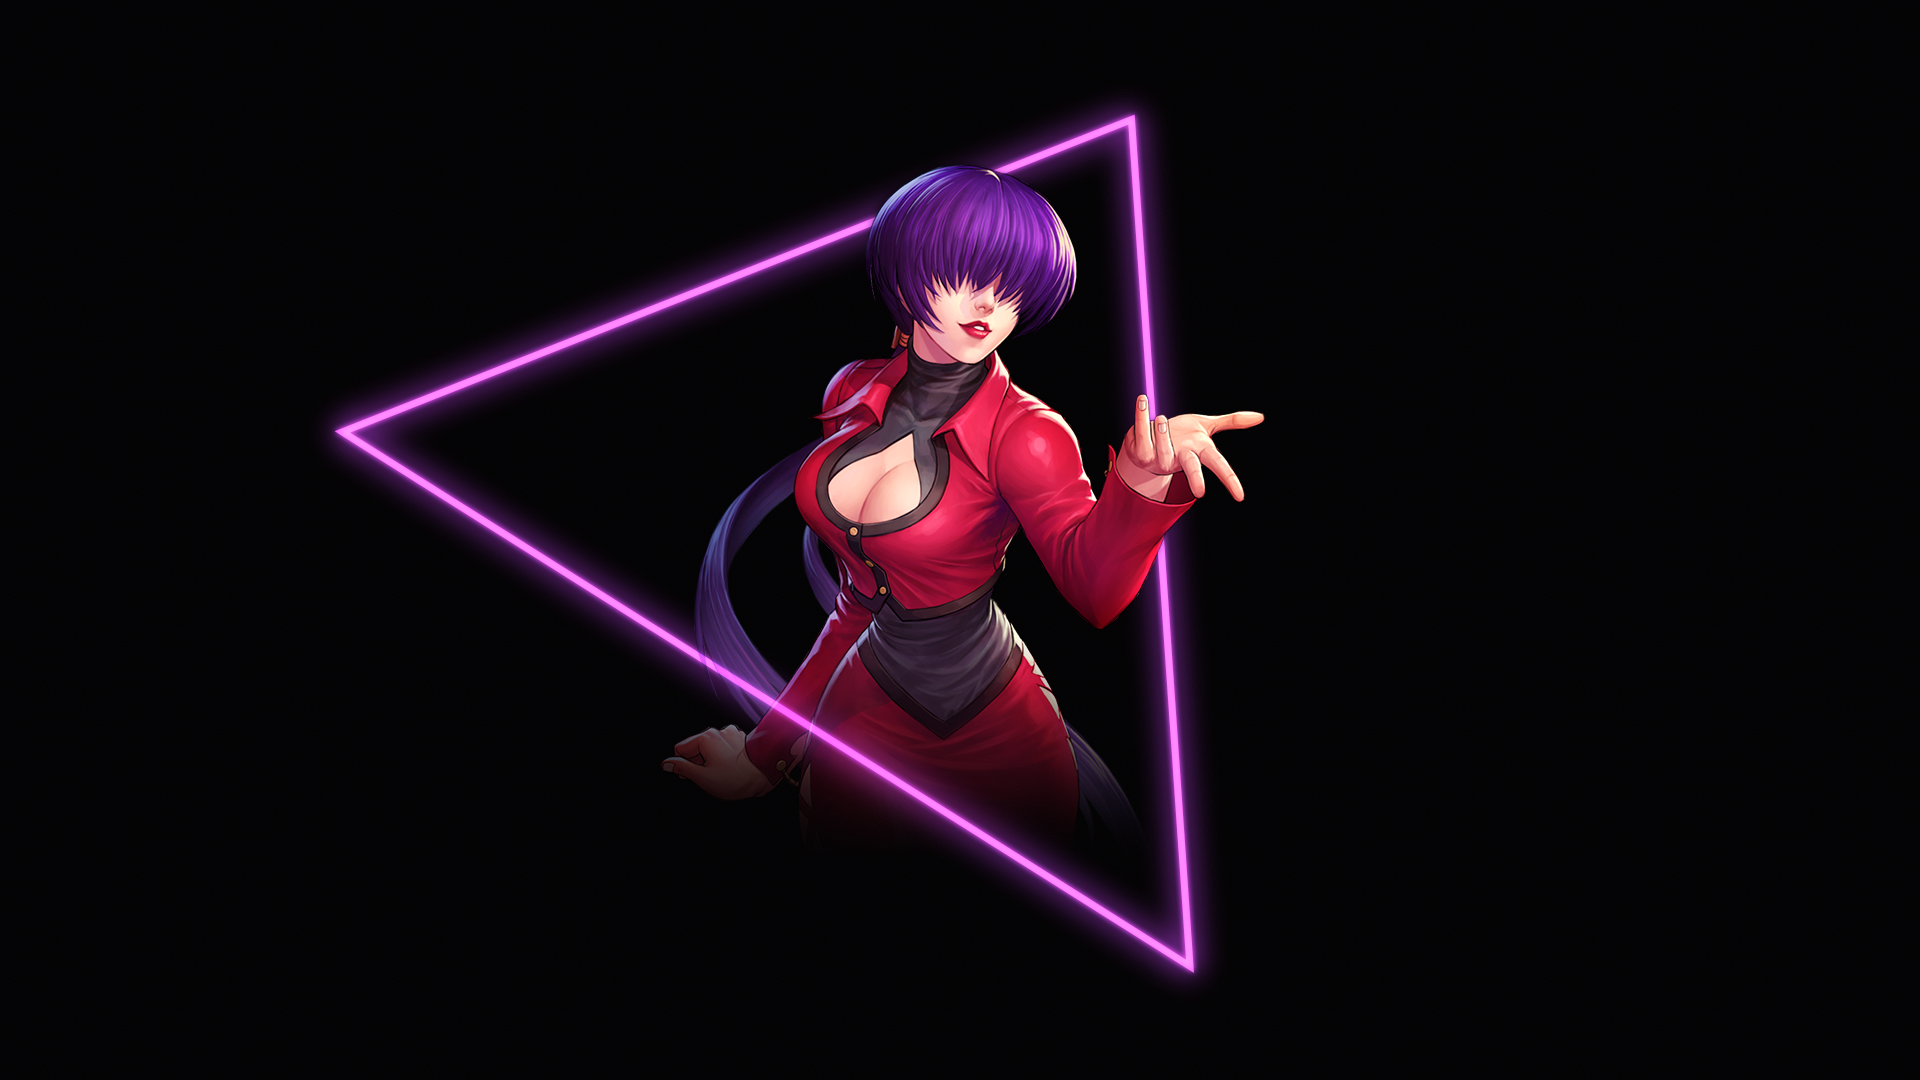 Shermie King Of Fighters Video Games Video Game Characters Video Game Girls Purple Hair Bangs Ponyta 1920x1080